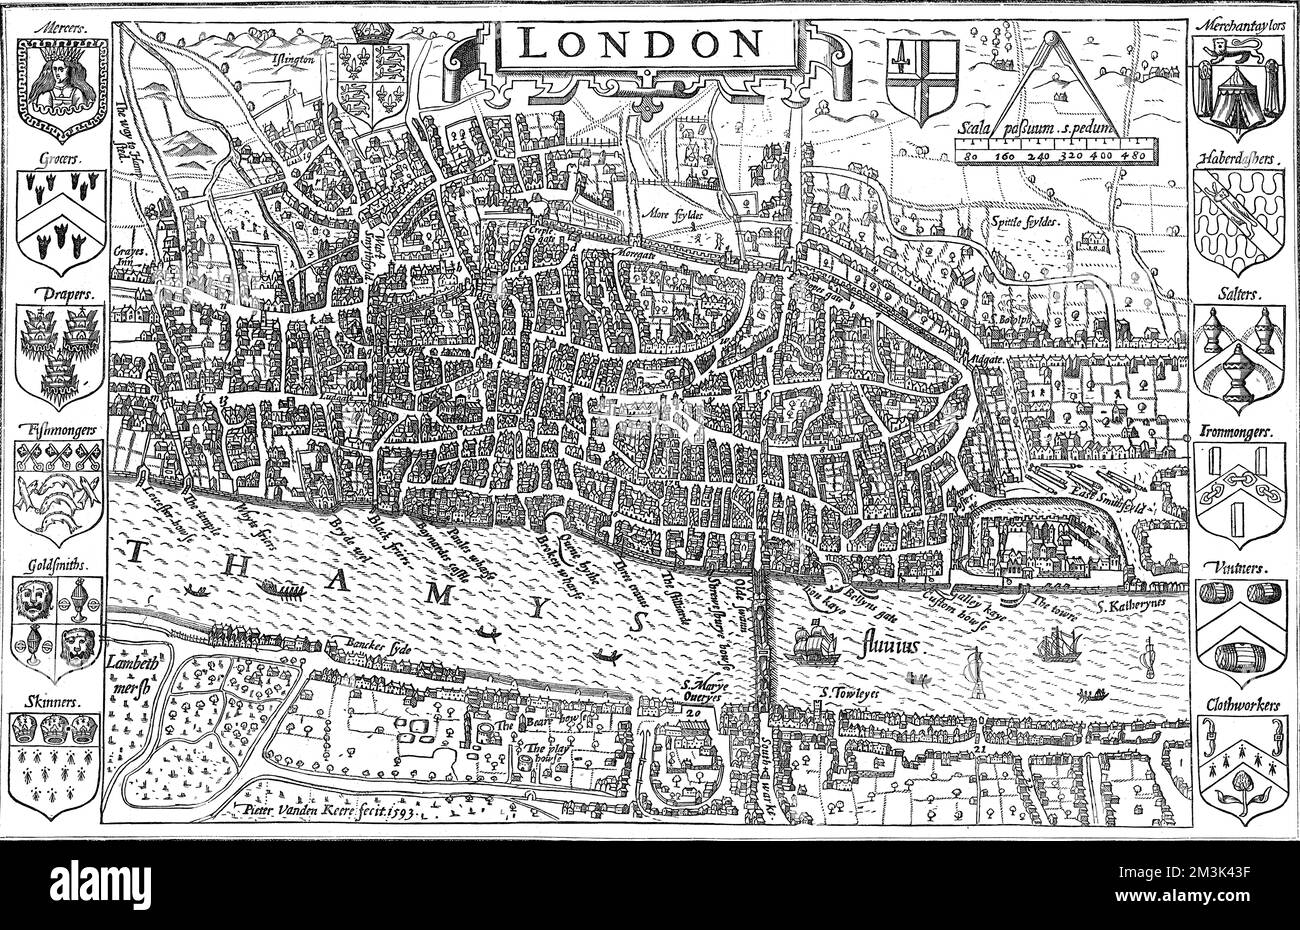 Map, made by Pieter Vanden Keere, showing the extent of London in 1593.      Around the edge of the map are the crests of twelve of the Merchant Guilds.  The ones shown are: Mercers, Grocers, Drapers, Fishmongers, Goldsmiths, Skinners, Merchant Taylors, Haberdashers, Salters, Ironmongers, Vintners and Clothworkers.     Date: 1593 Stock Photo